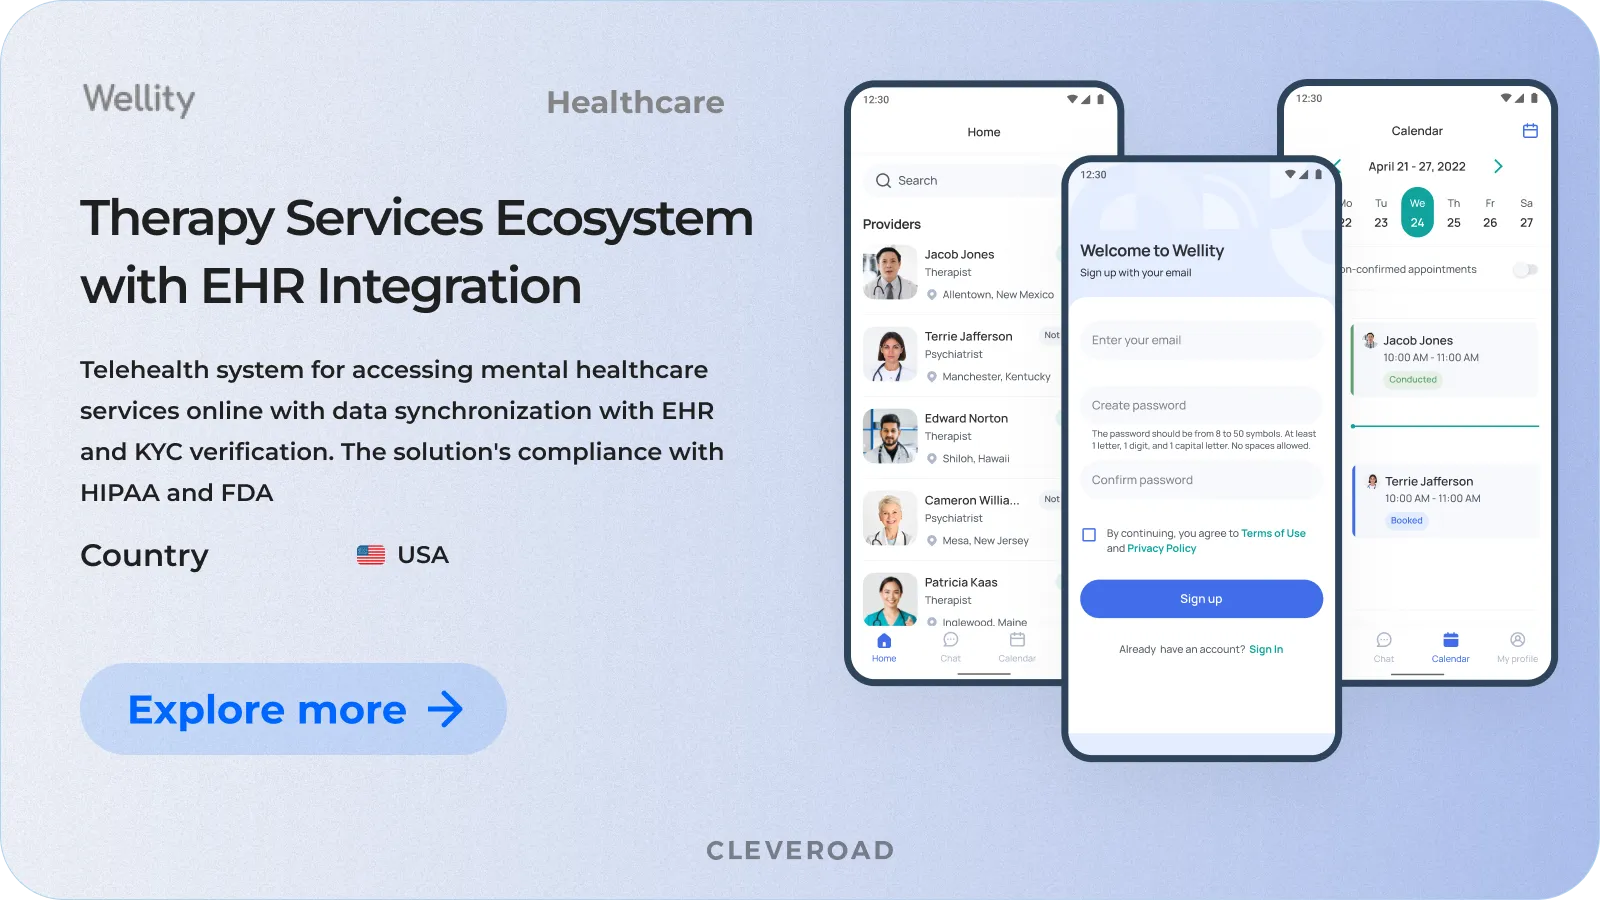 Therapy services ecosystem built by Cleveroad